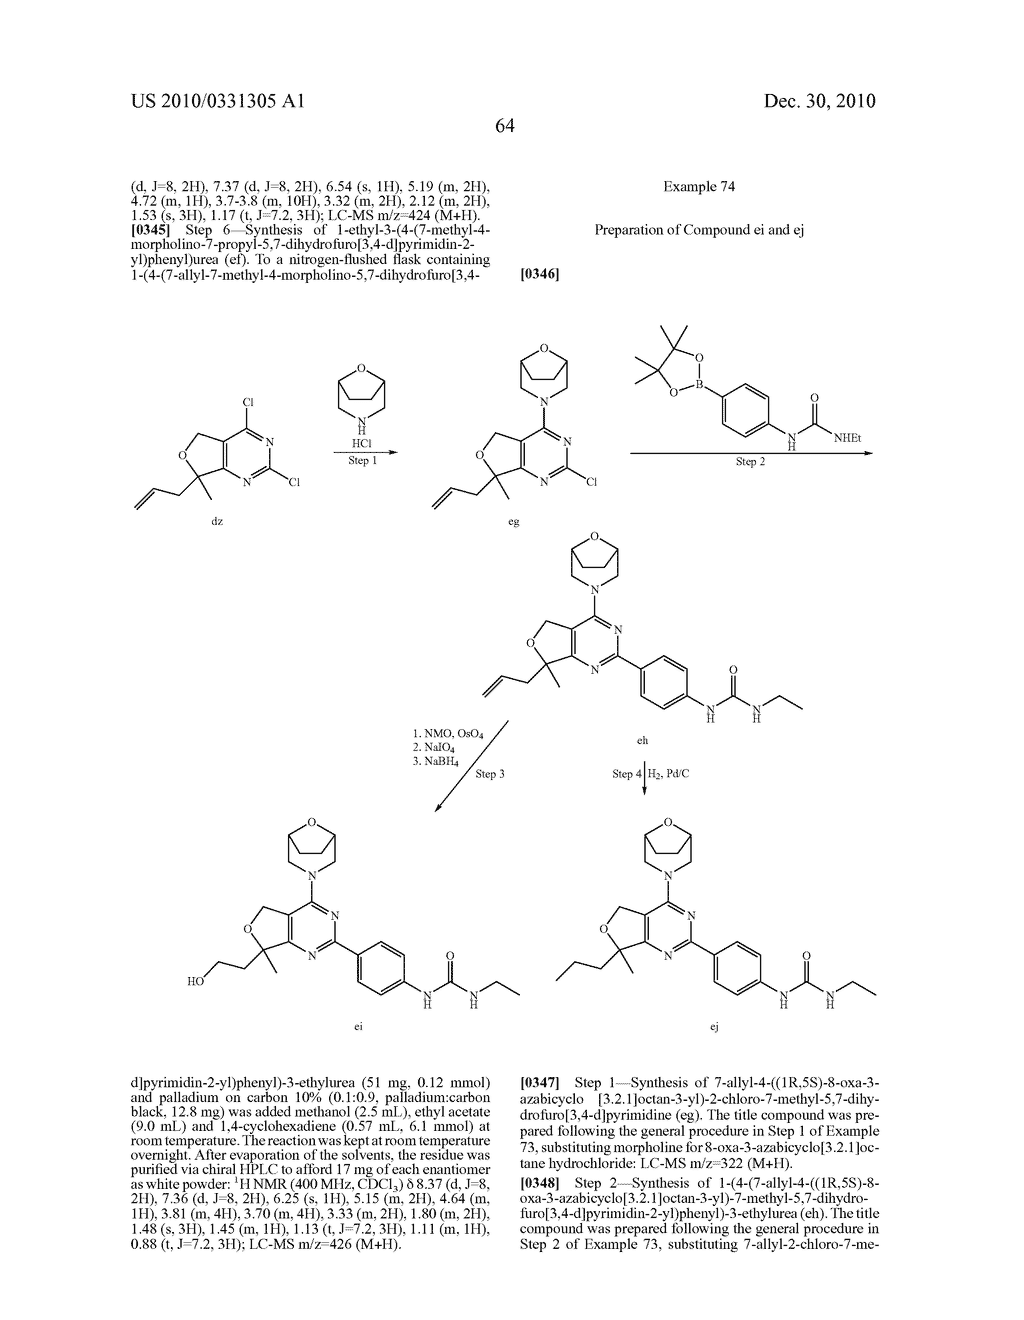 OXO-HETEROCYCLE FUSED PYRIMIDINE COMPOUNDS, COMPOSITIONS AND METHODS OF USE - diagram, schematic, and image 68